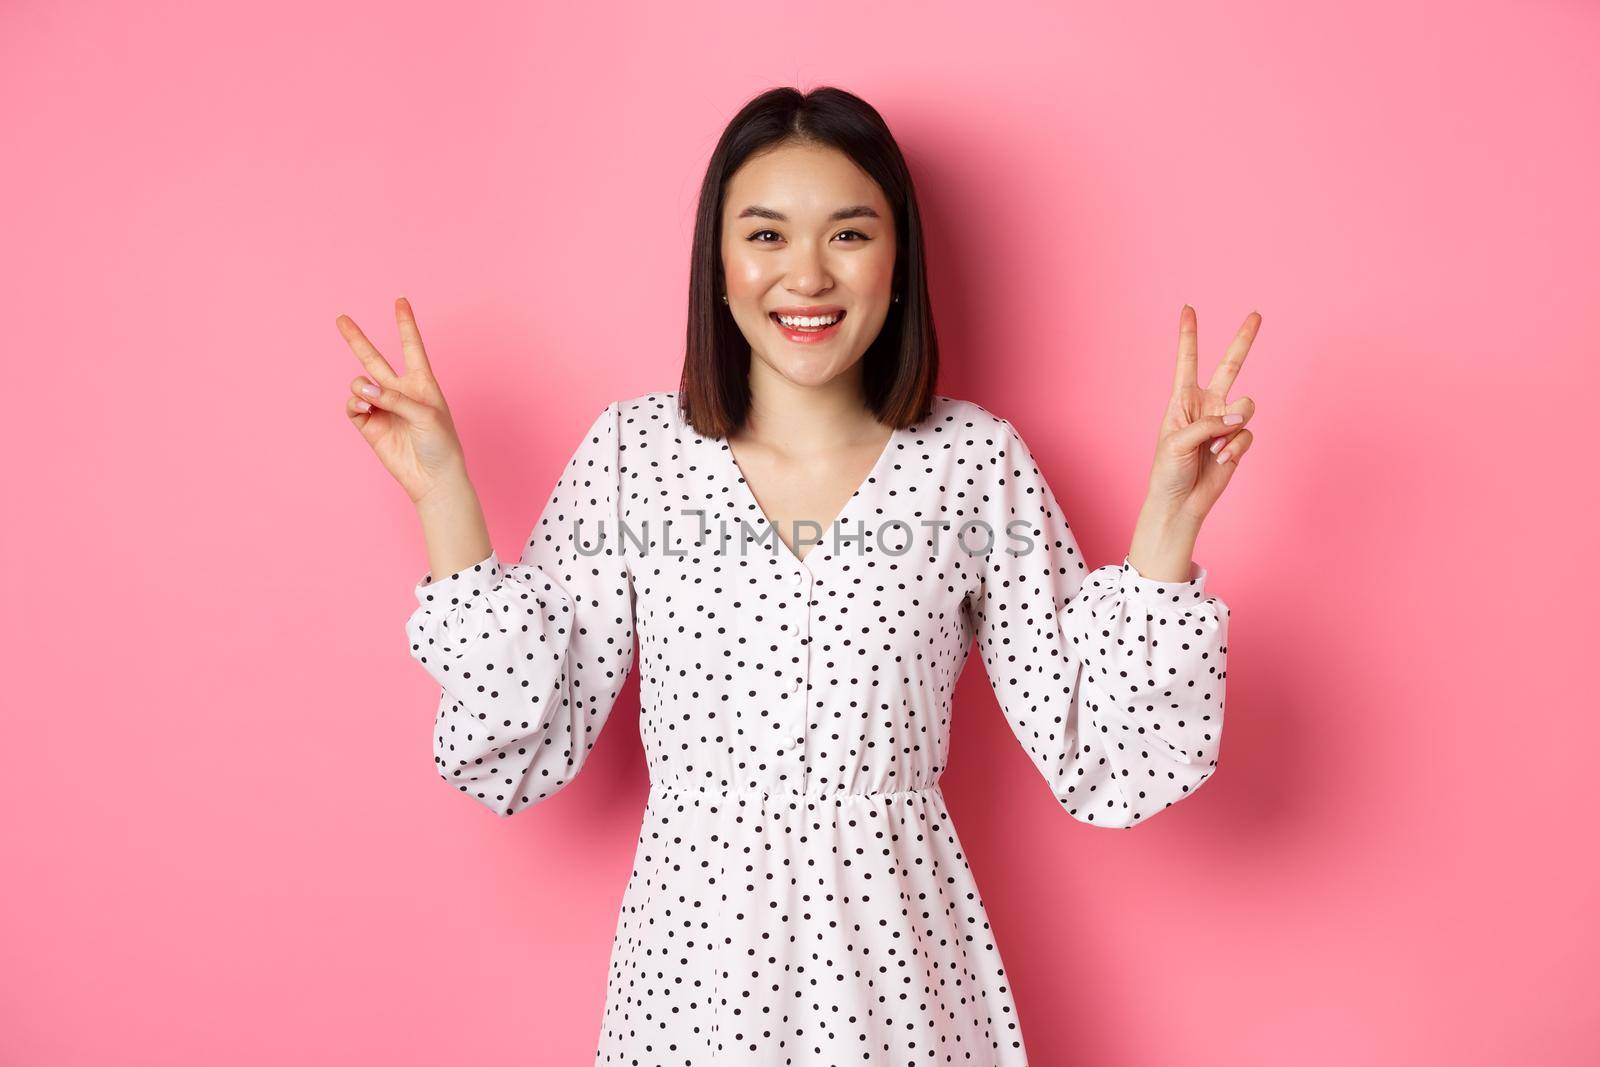 Cute asian brunette girl in dress smiling, showing kawaii peace signs and looking happy, standing over pink background.